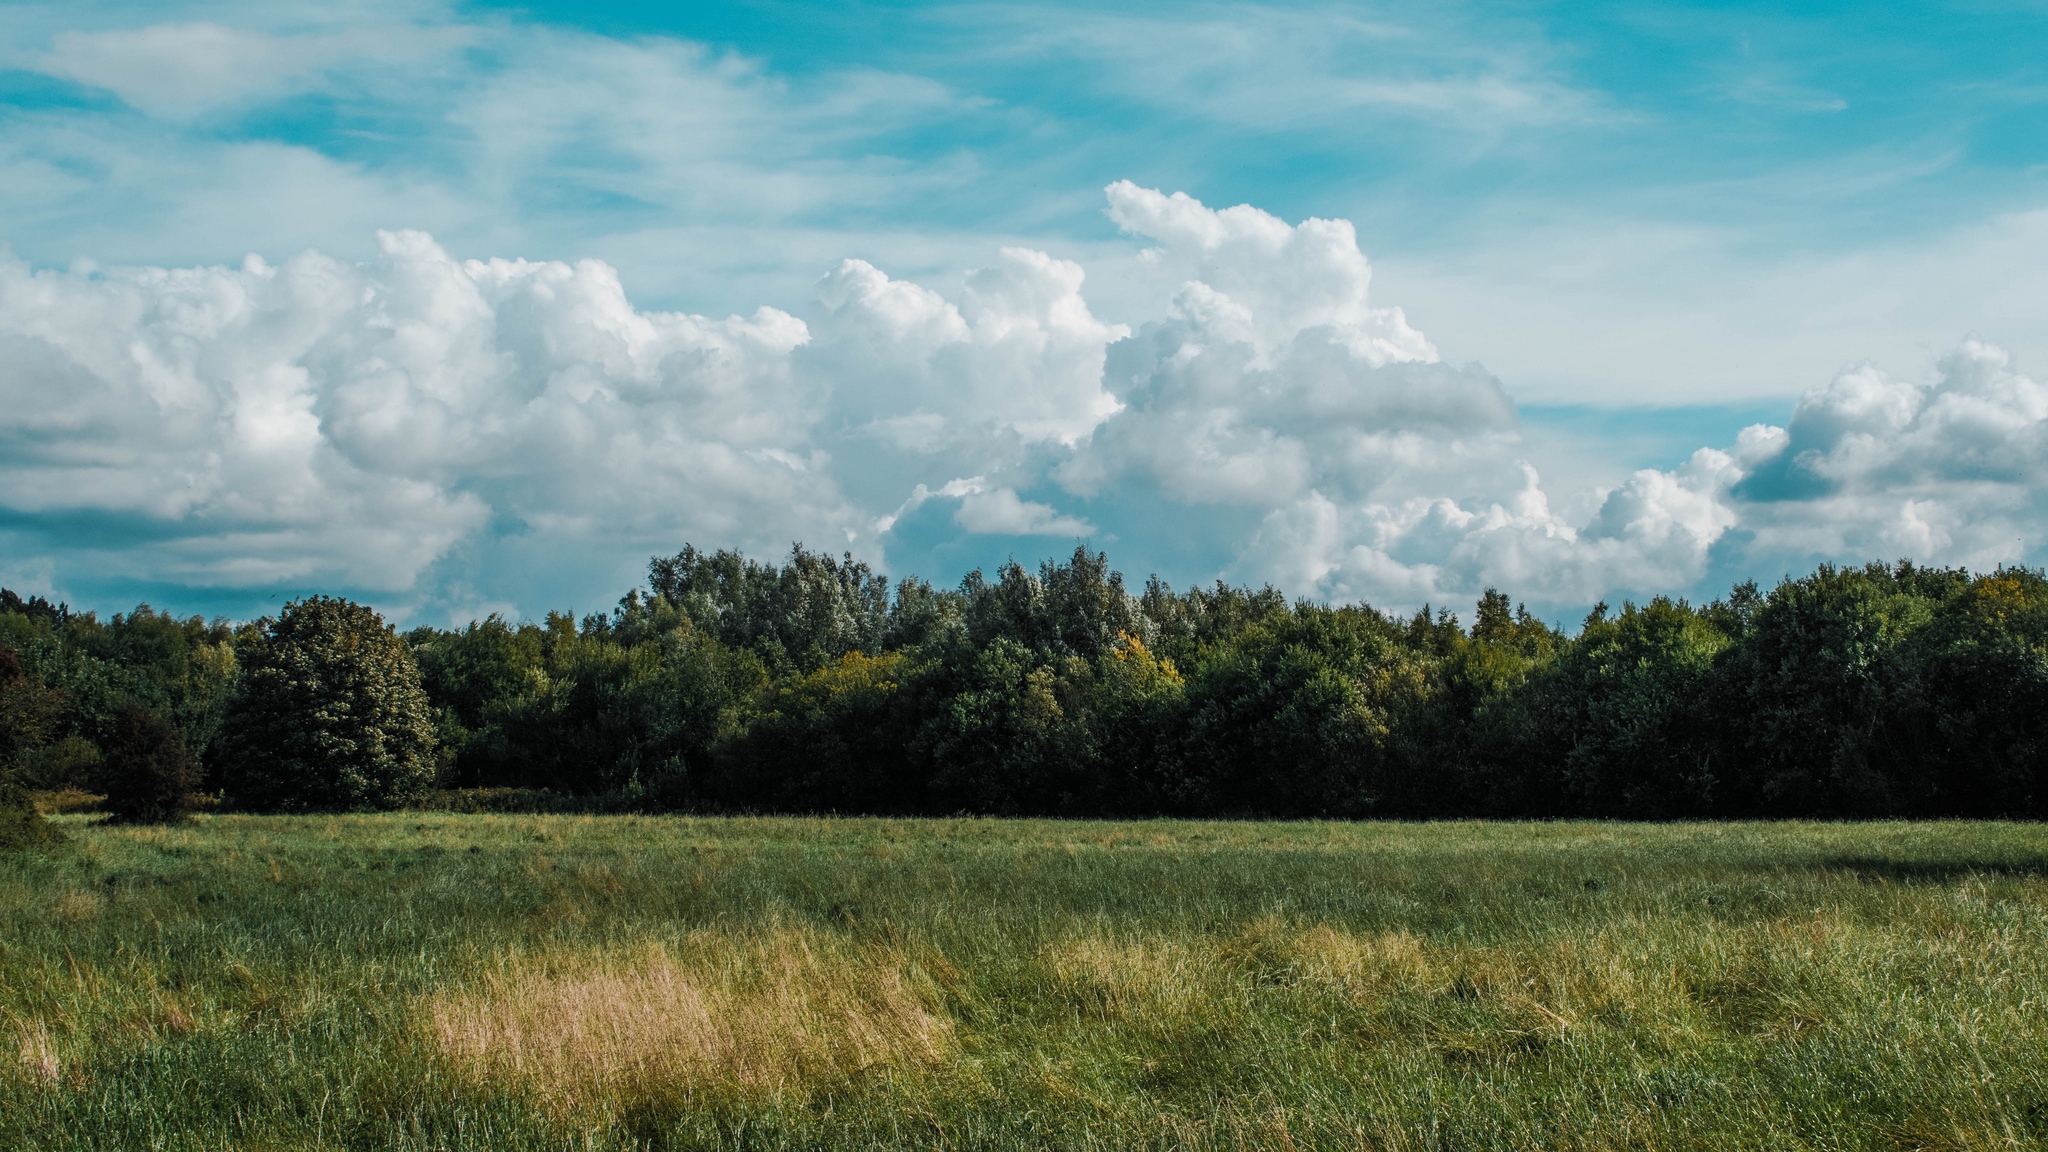 Wallpaper Field, Grass, Clouds, Trees - Clouds And Trees Background - HD Wallpaper 